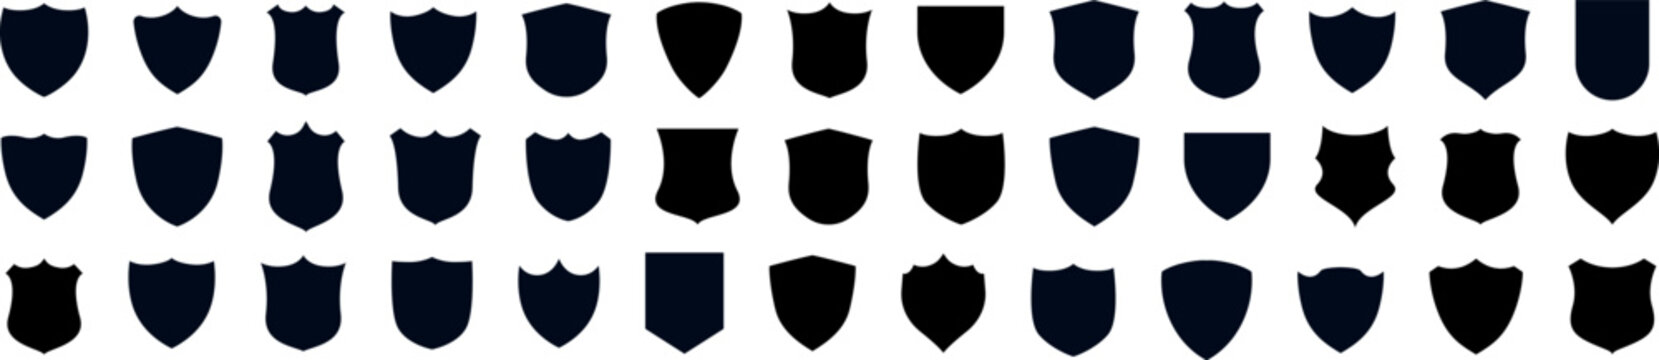 Shields set. Collection of security shield icons with contours and linear signs. Design elements for concept of safety and protection. Vector illustration